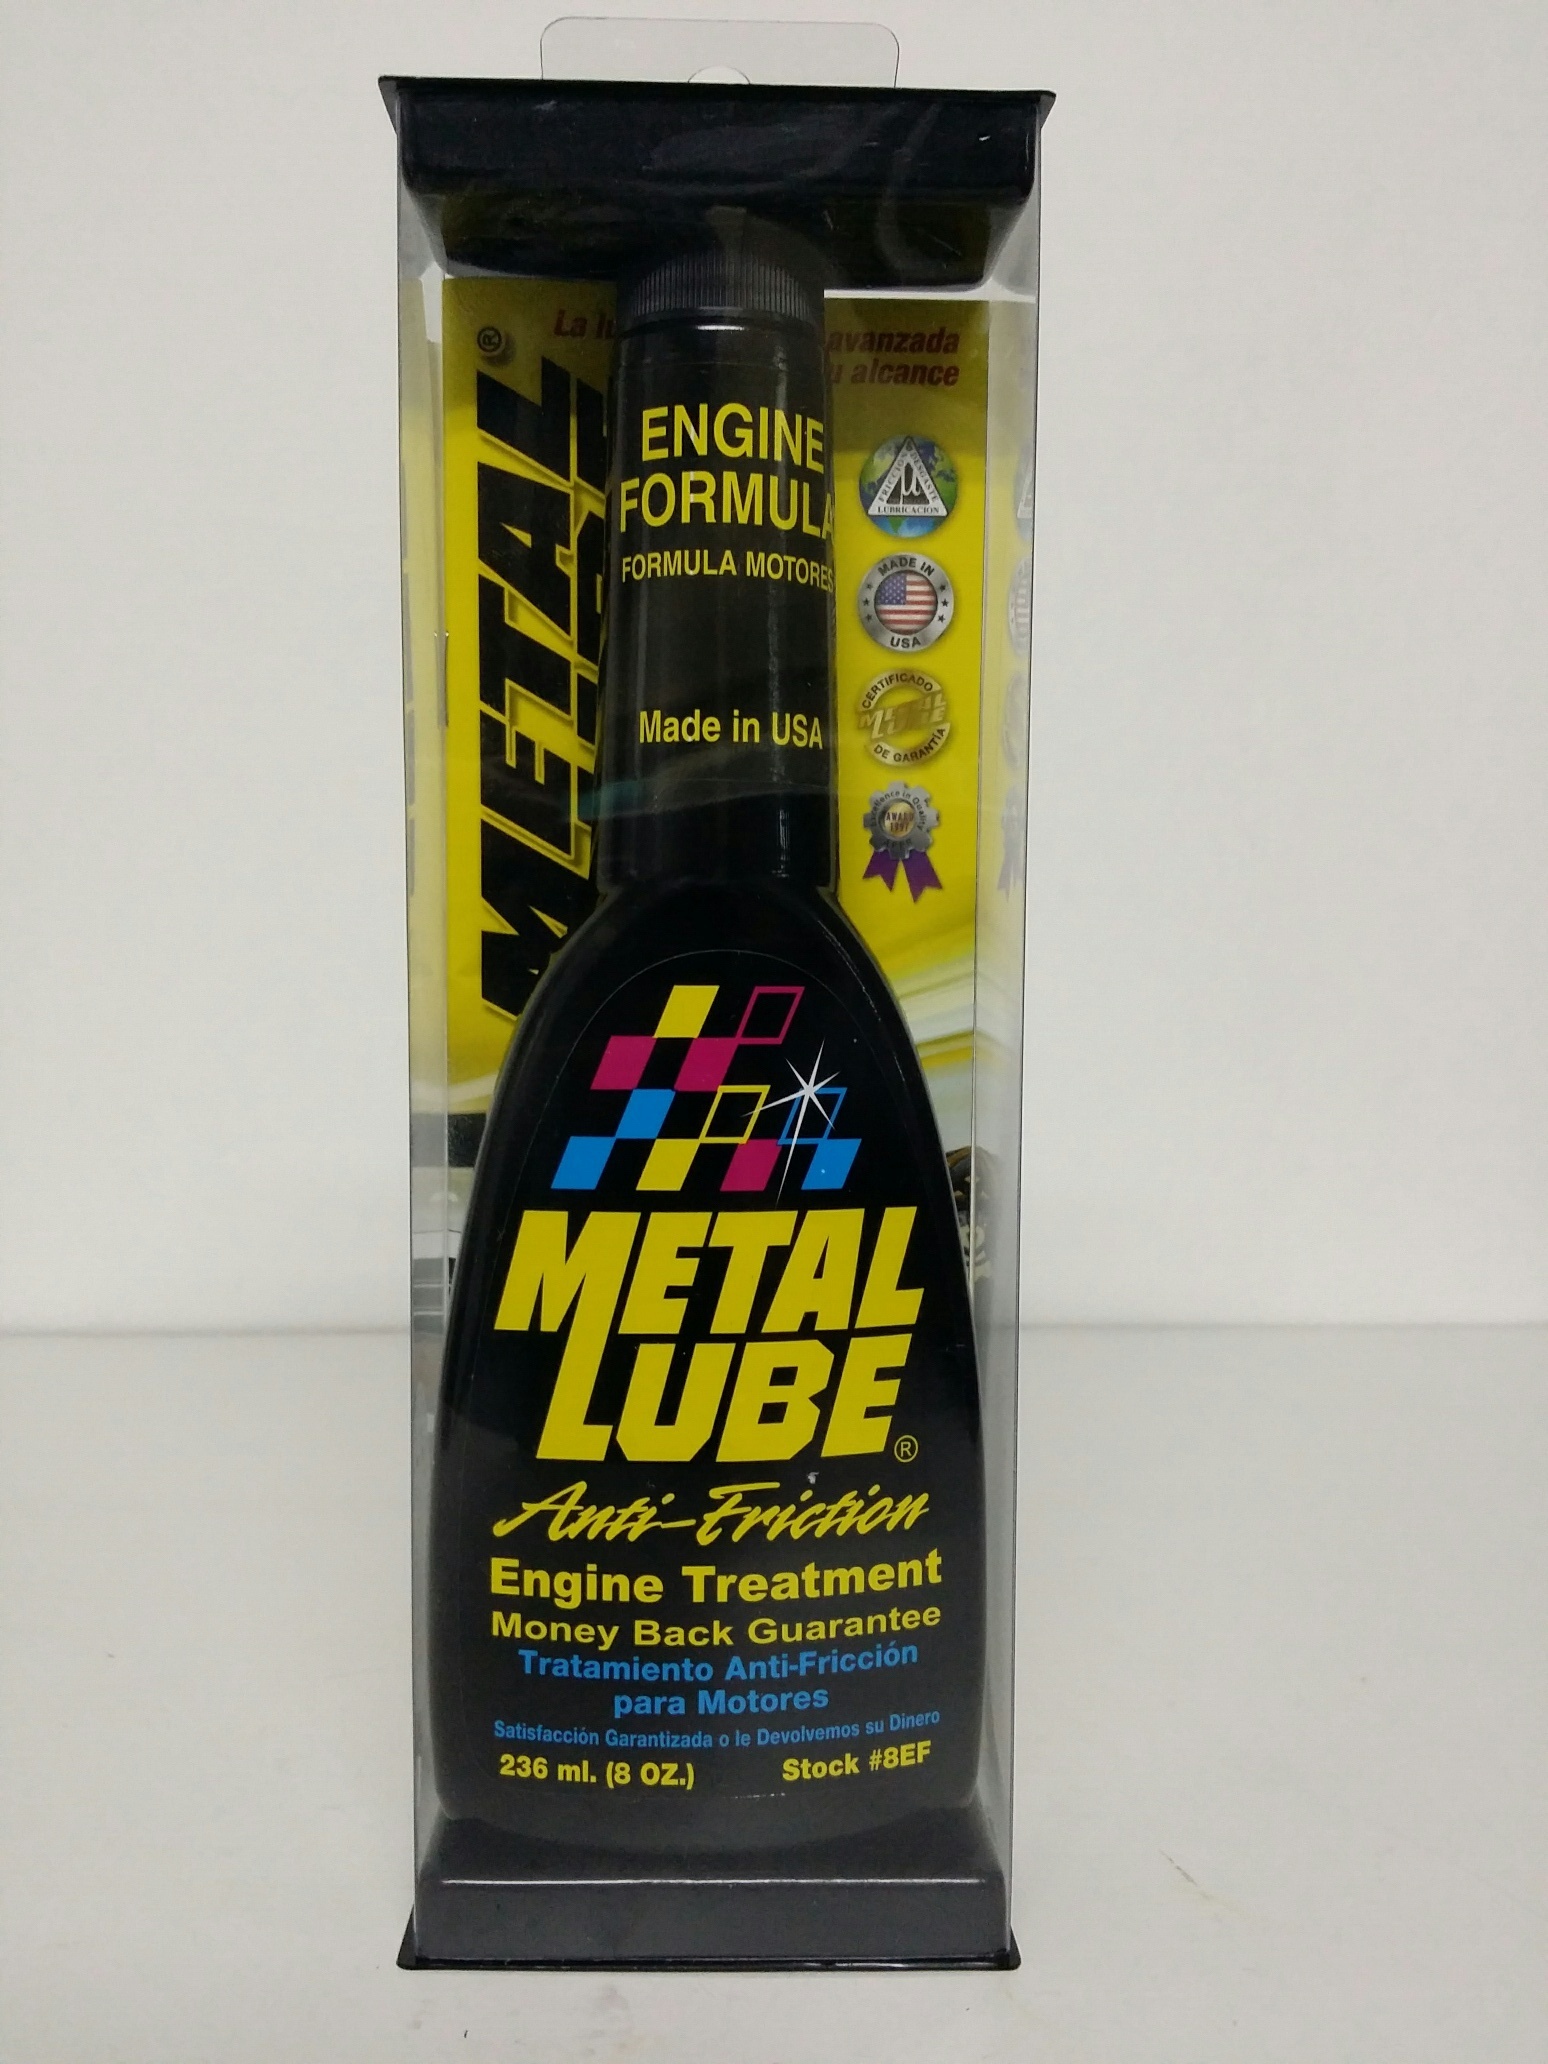 Metal Lube Anti-fricition Engine Treatment Demonstration 